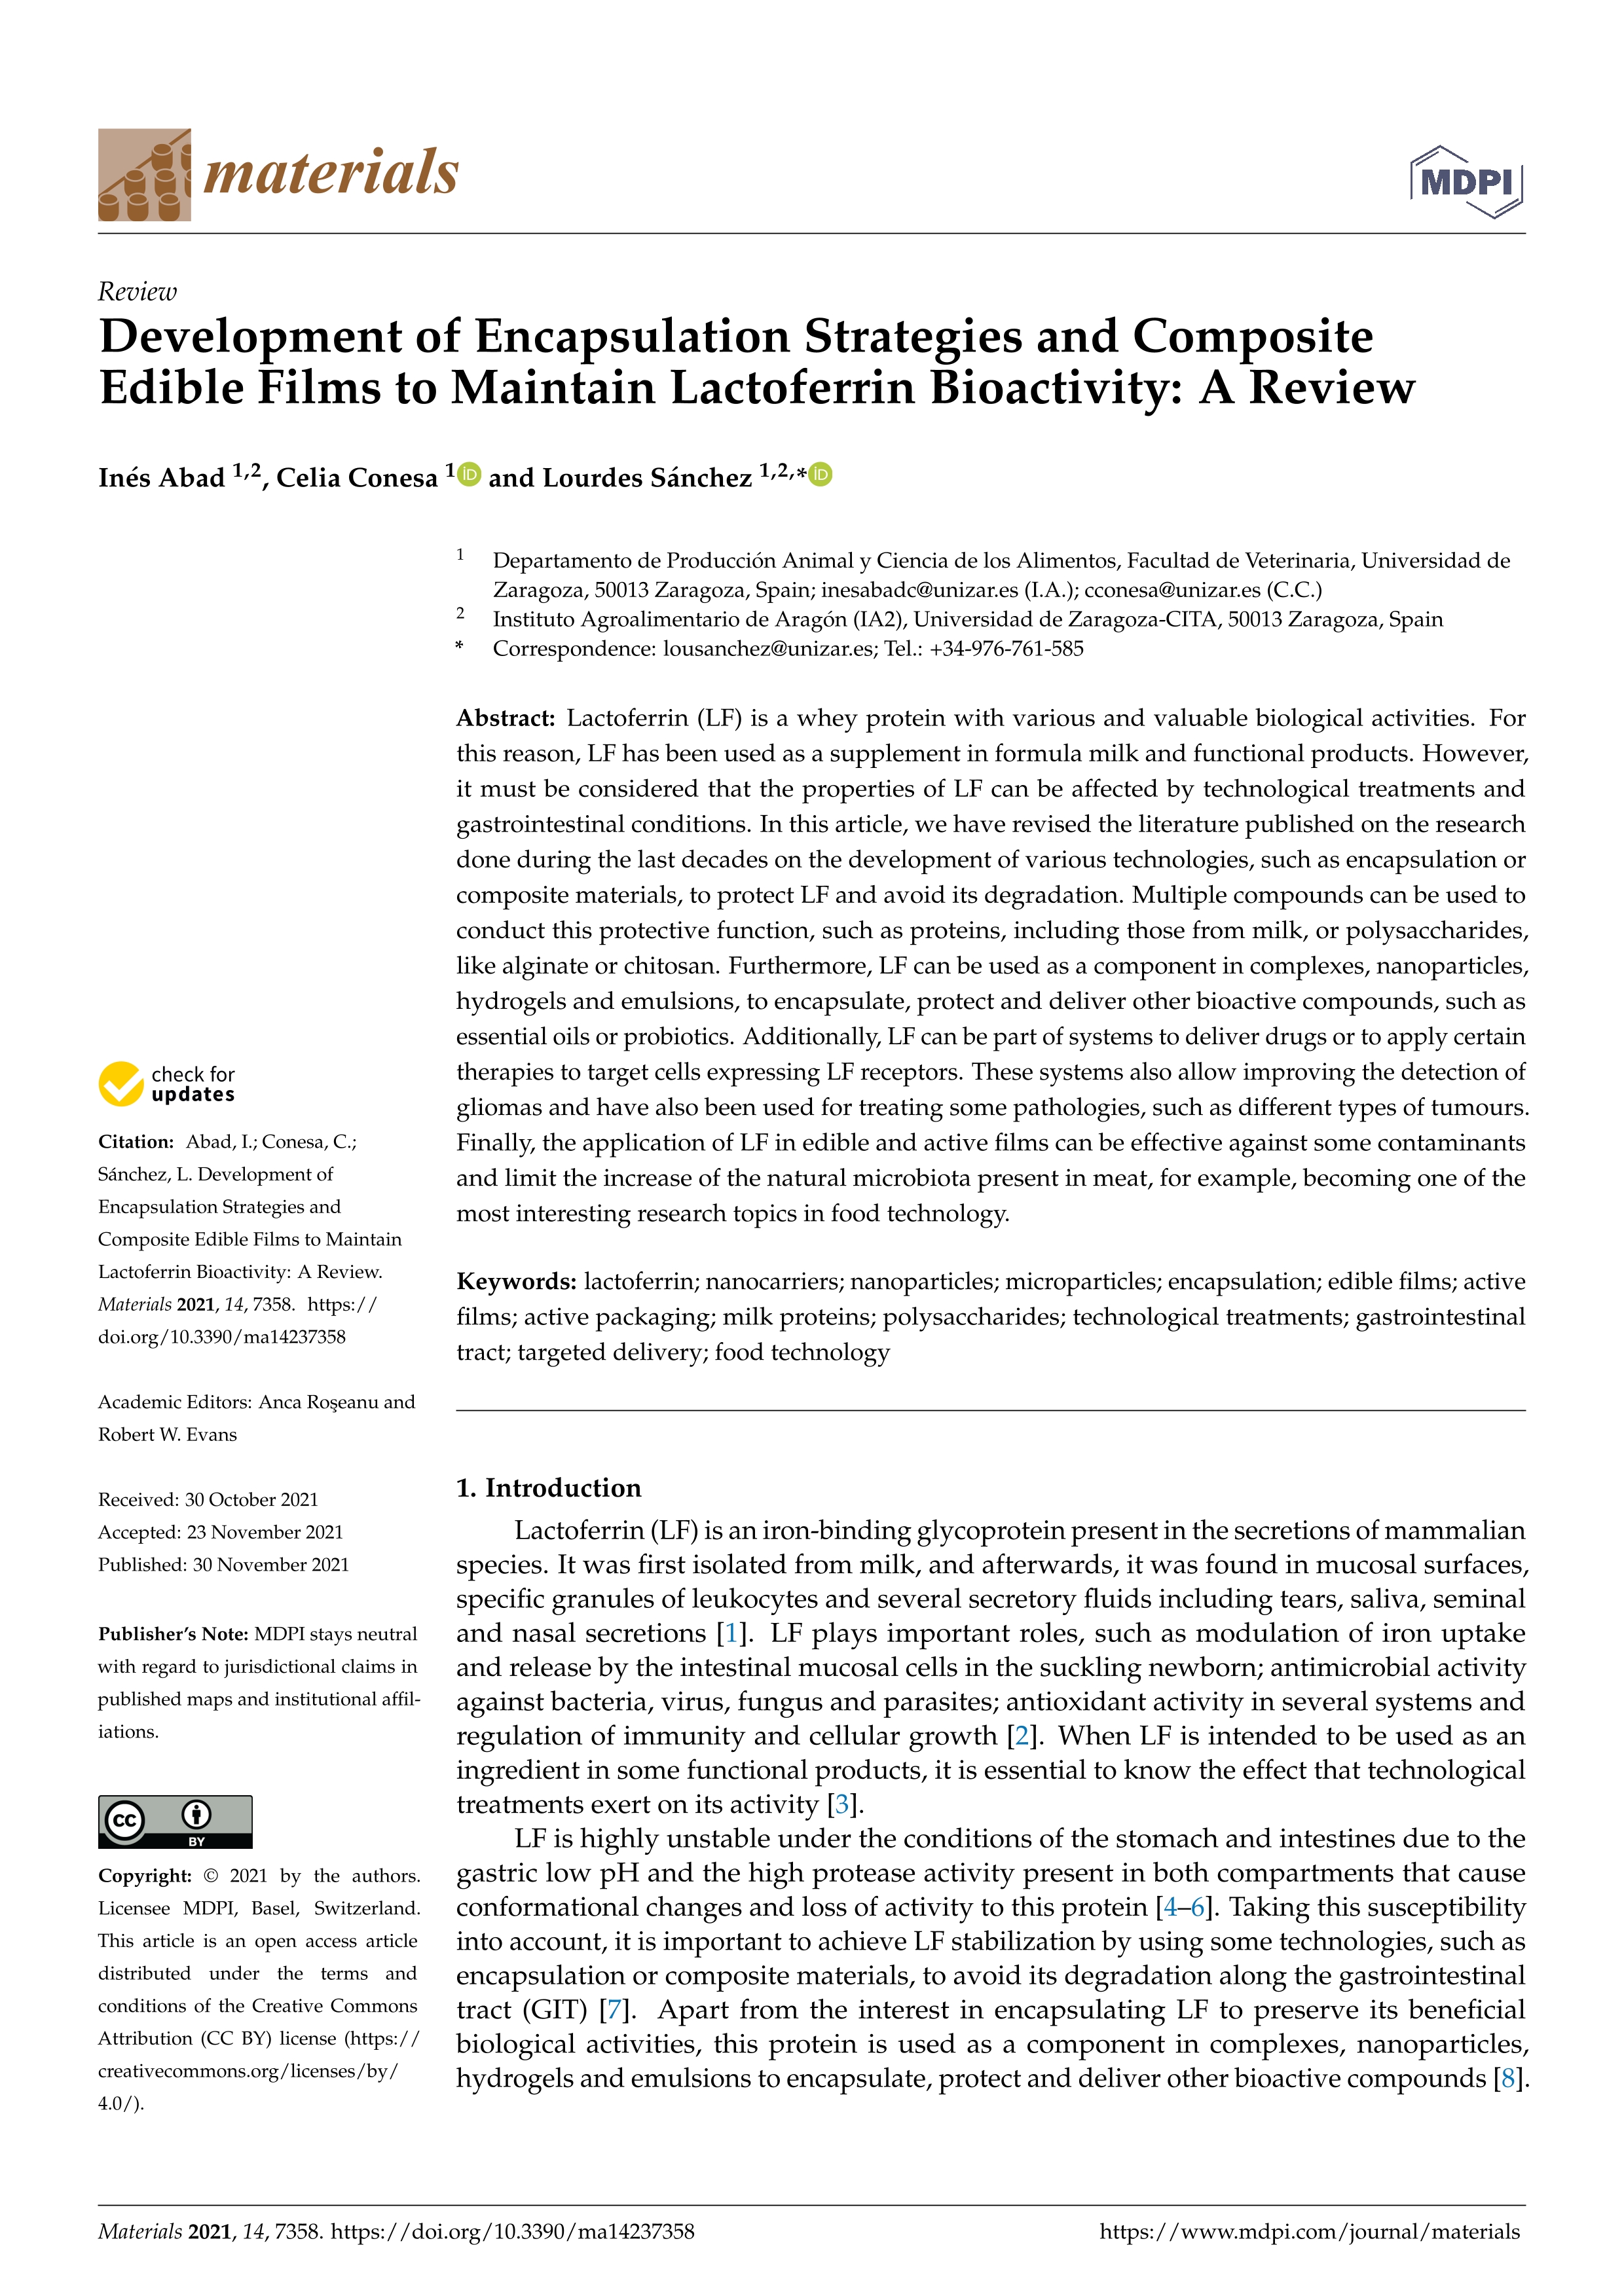 Development of encapsulation strategies and composite edible films to maintain lactoferrin bioactivity: A review